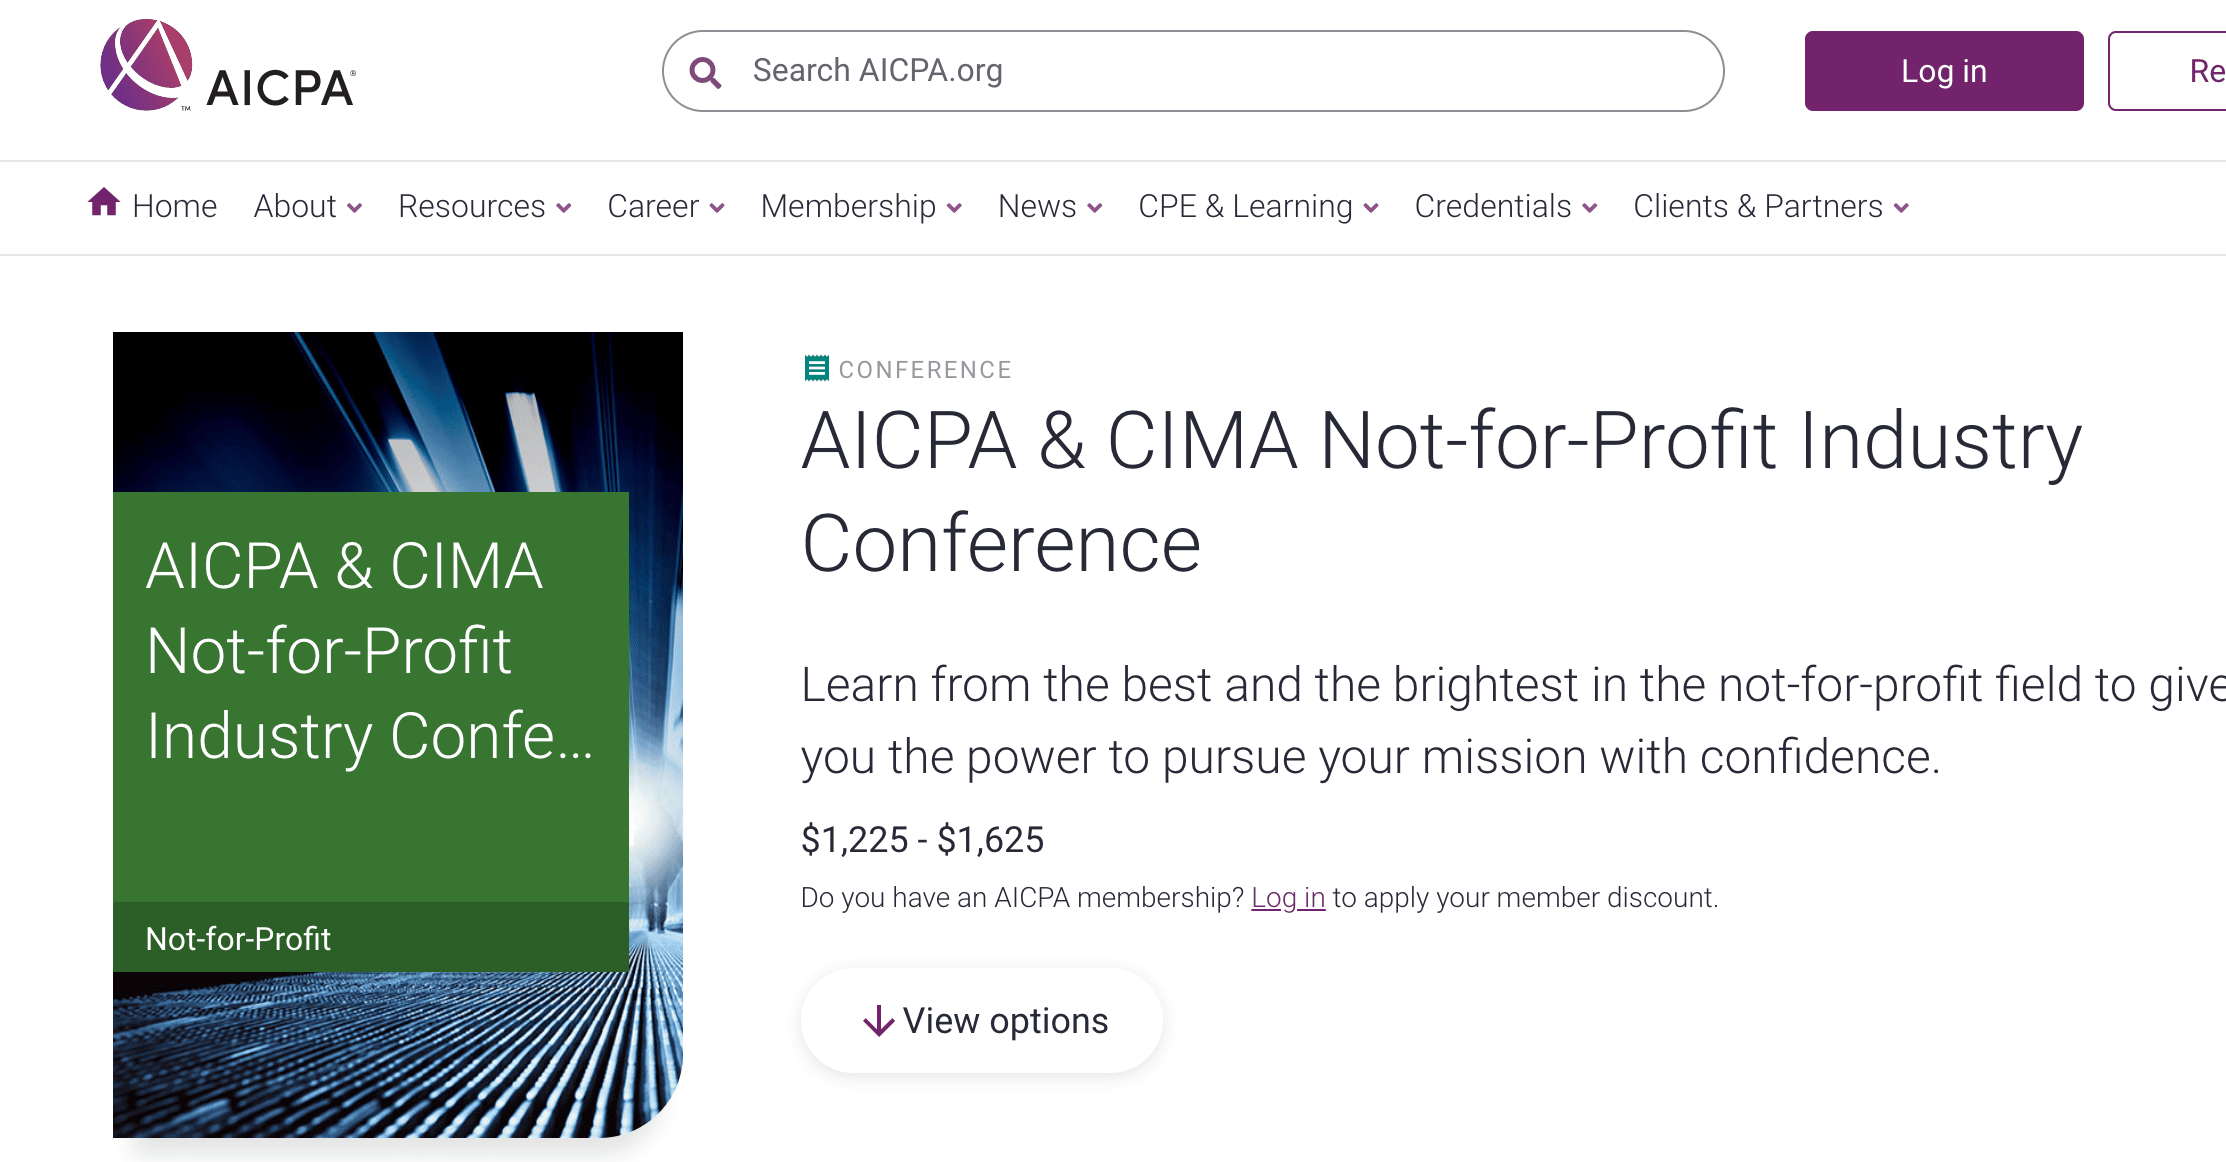 AICPA & CIMA Not-For-Profit Conference landing page